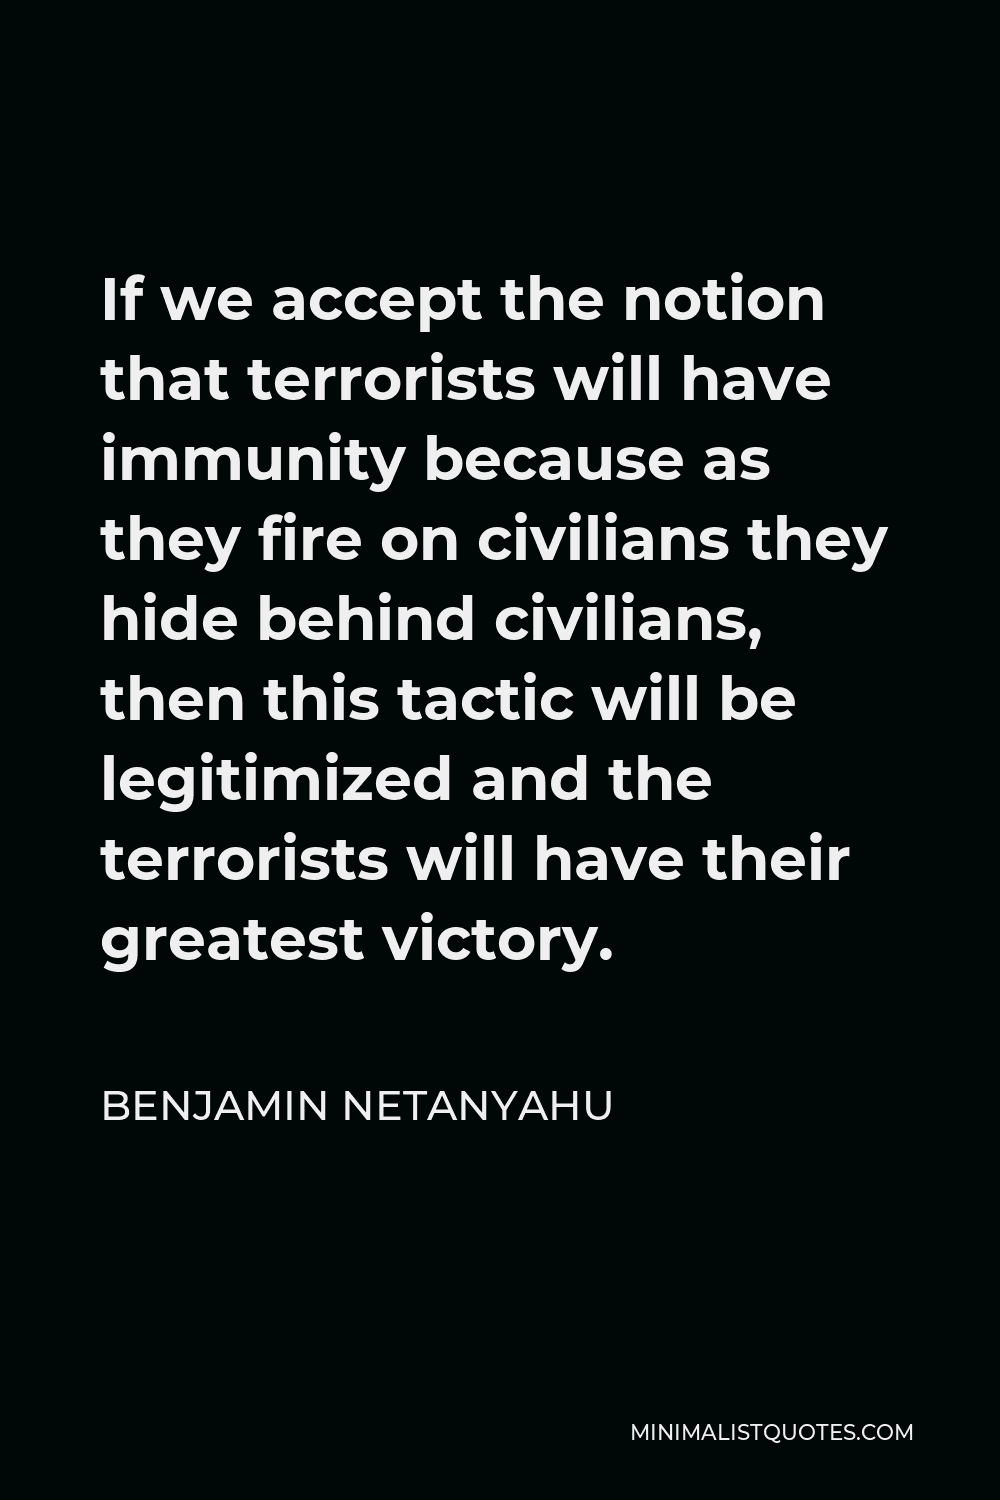 Benjamin Netanyahu Quote - If we accept the notion that terrorists will have immunity because as they fire on civilians they hide behind civilians, then this tactic will be legitimized and the terrorists will have their greatest victory.